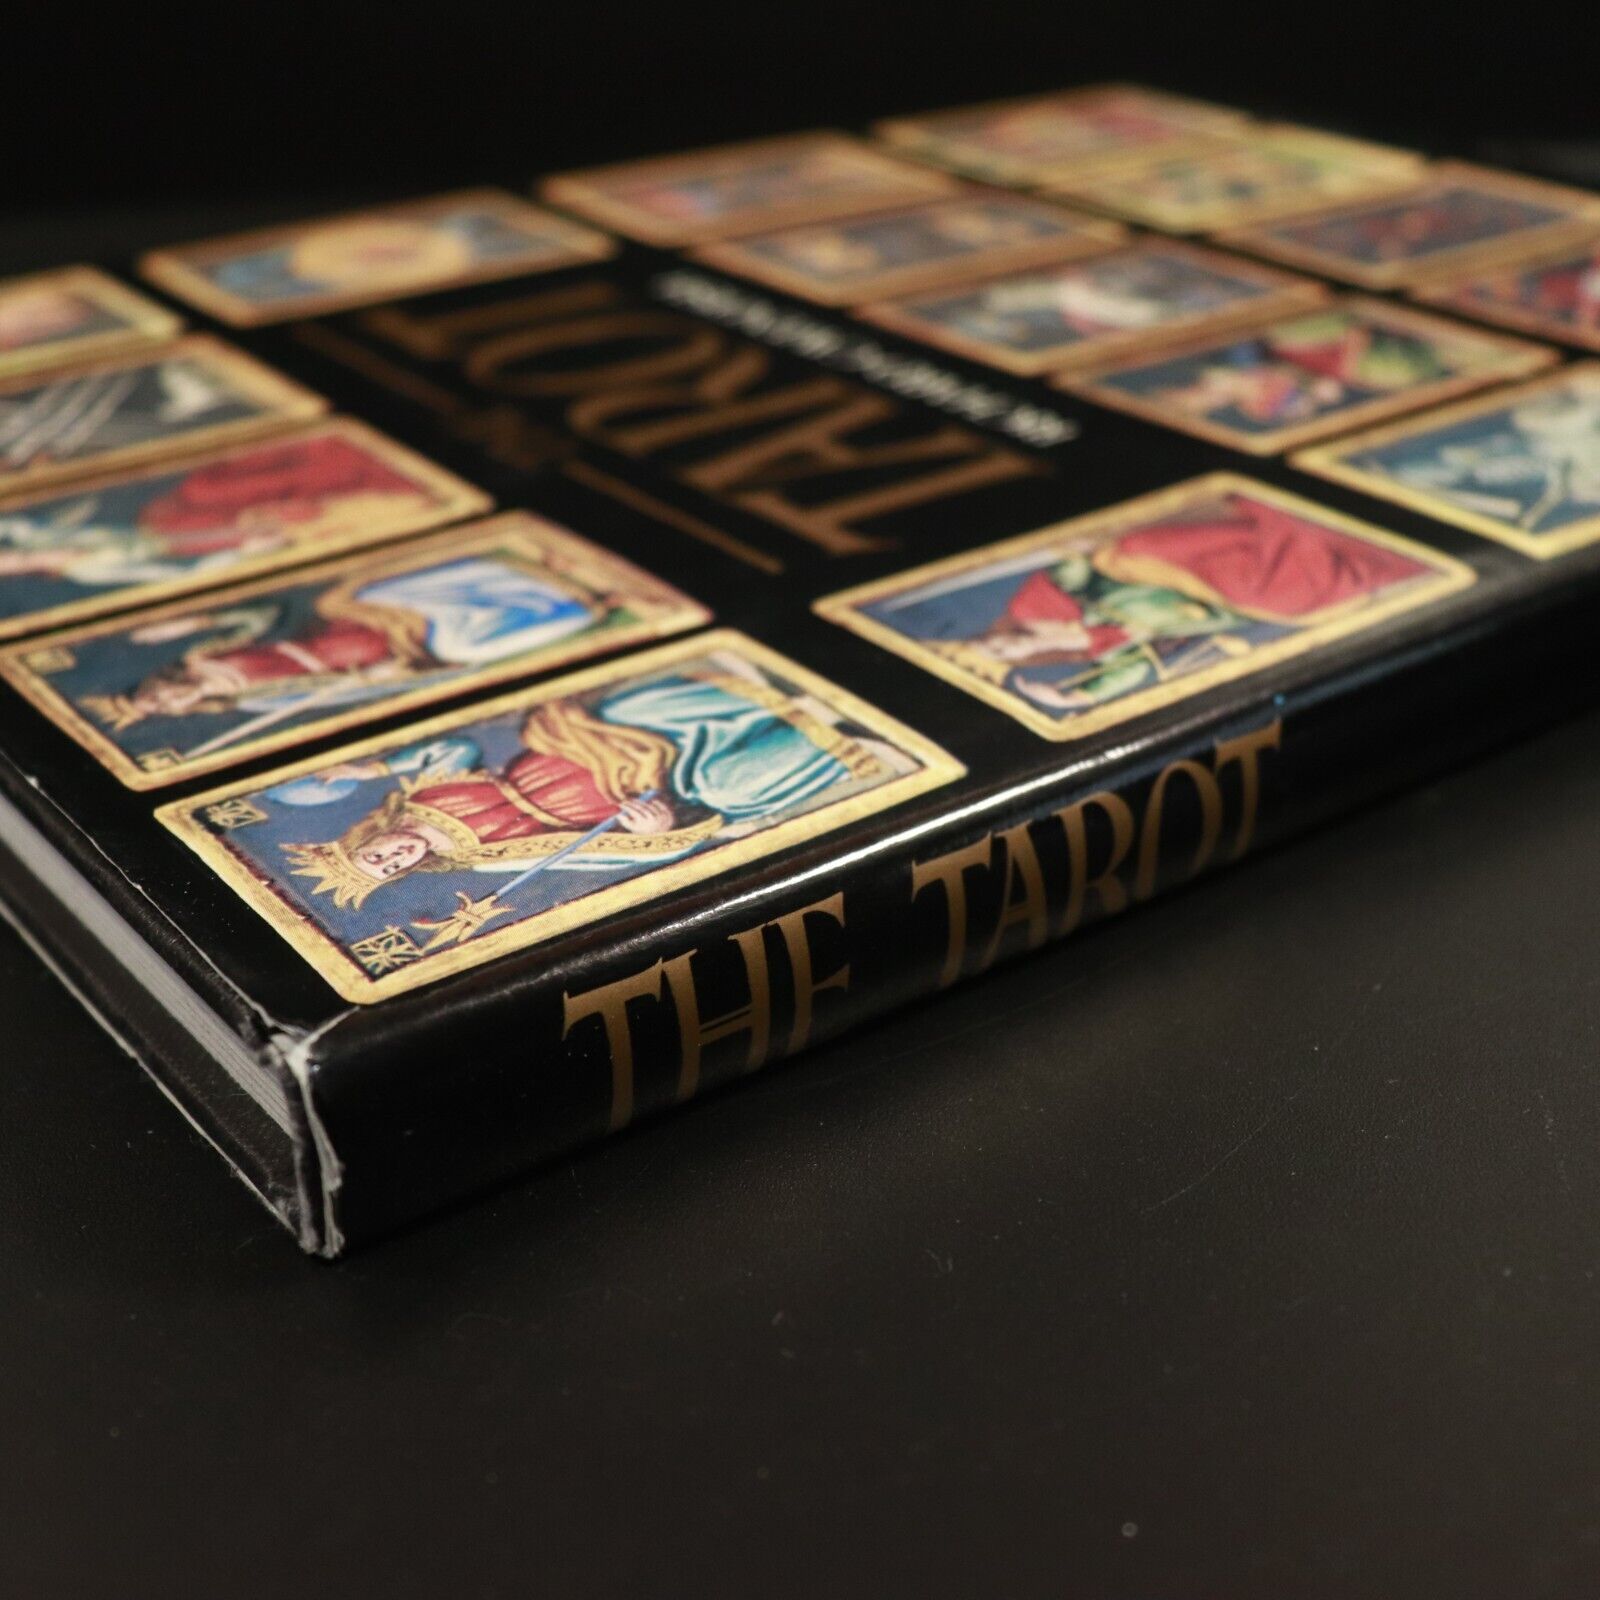 1988 The Tarot by Richard Cavendish Illustrated Occult Book Oracles Tarot Cards